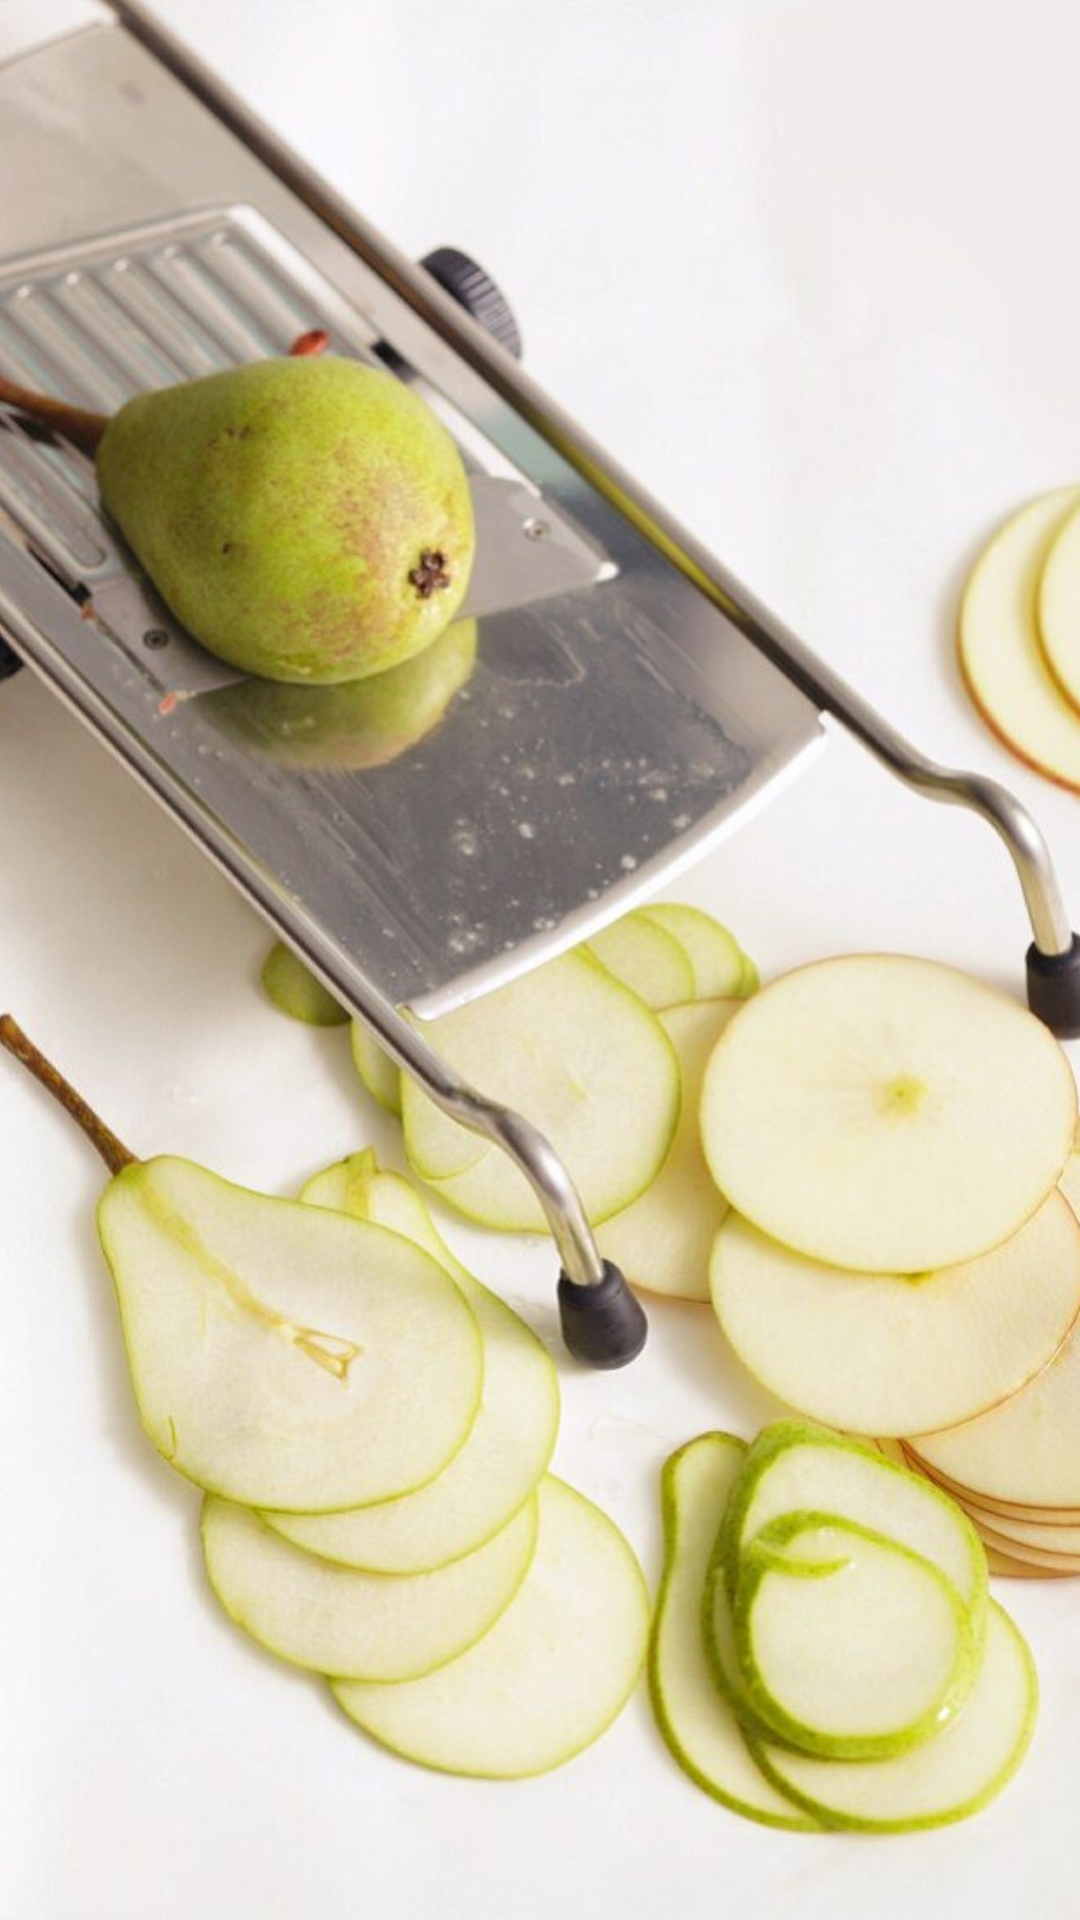 Slice pears with a slicer